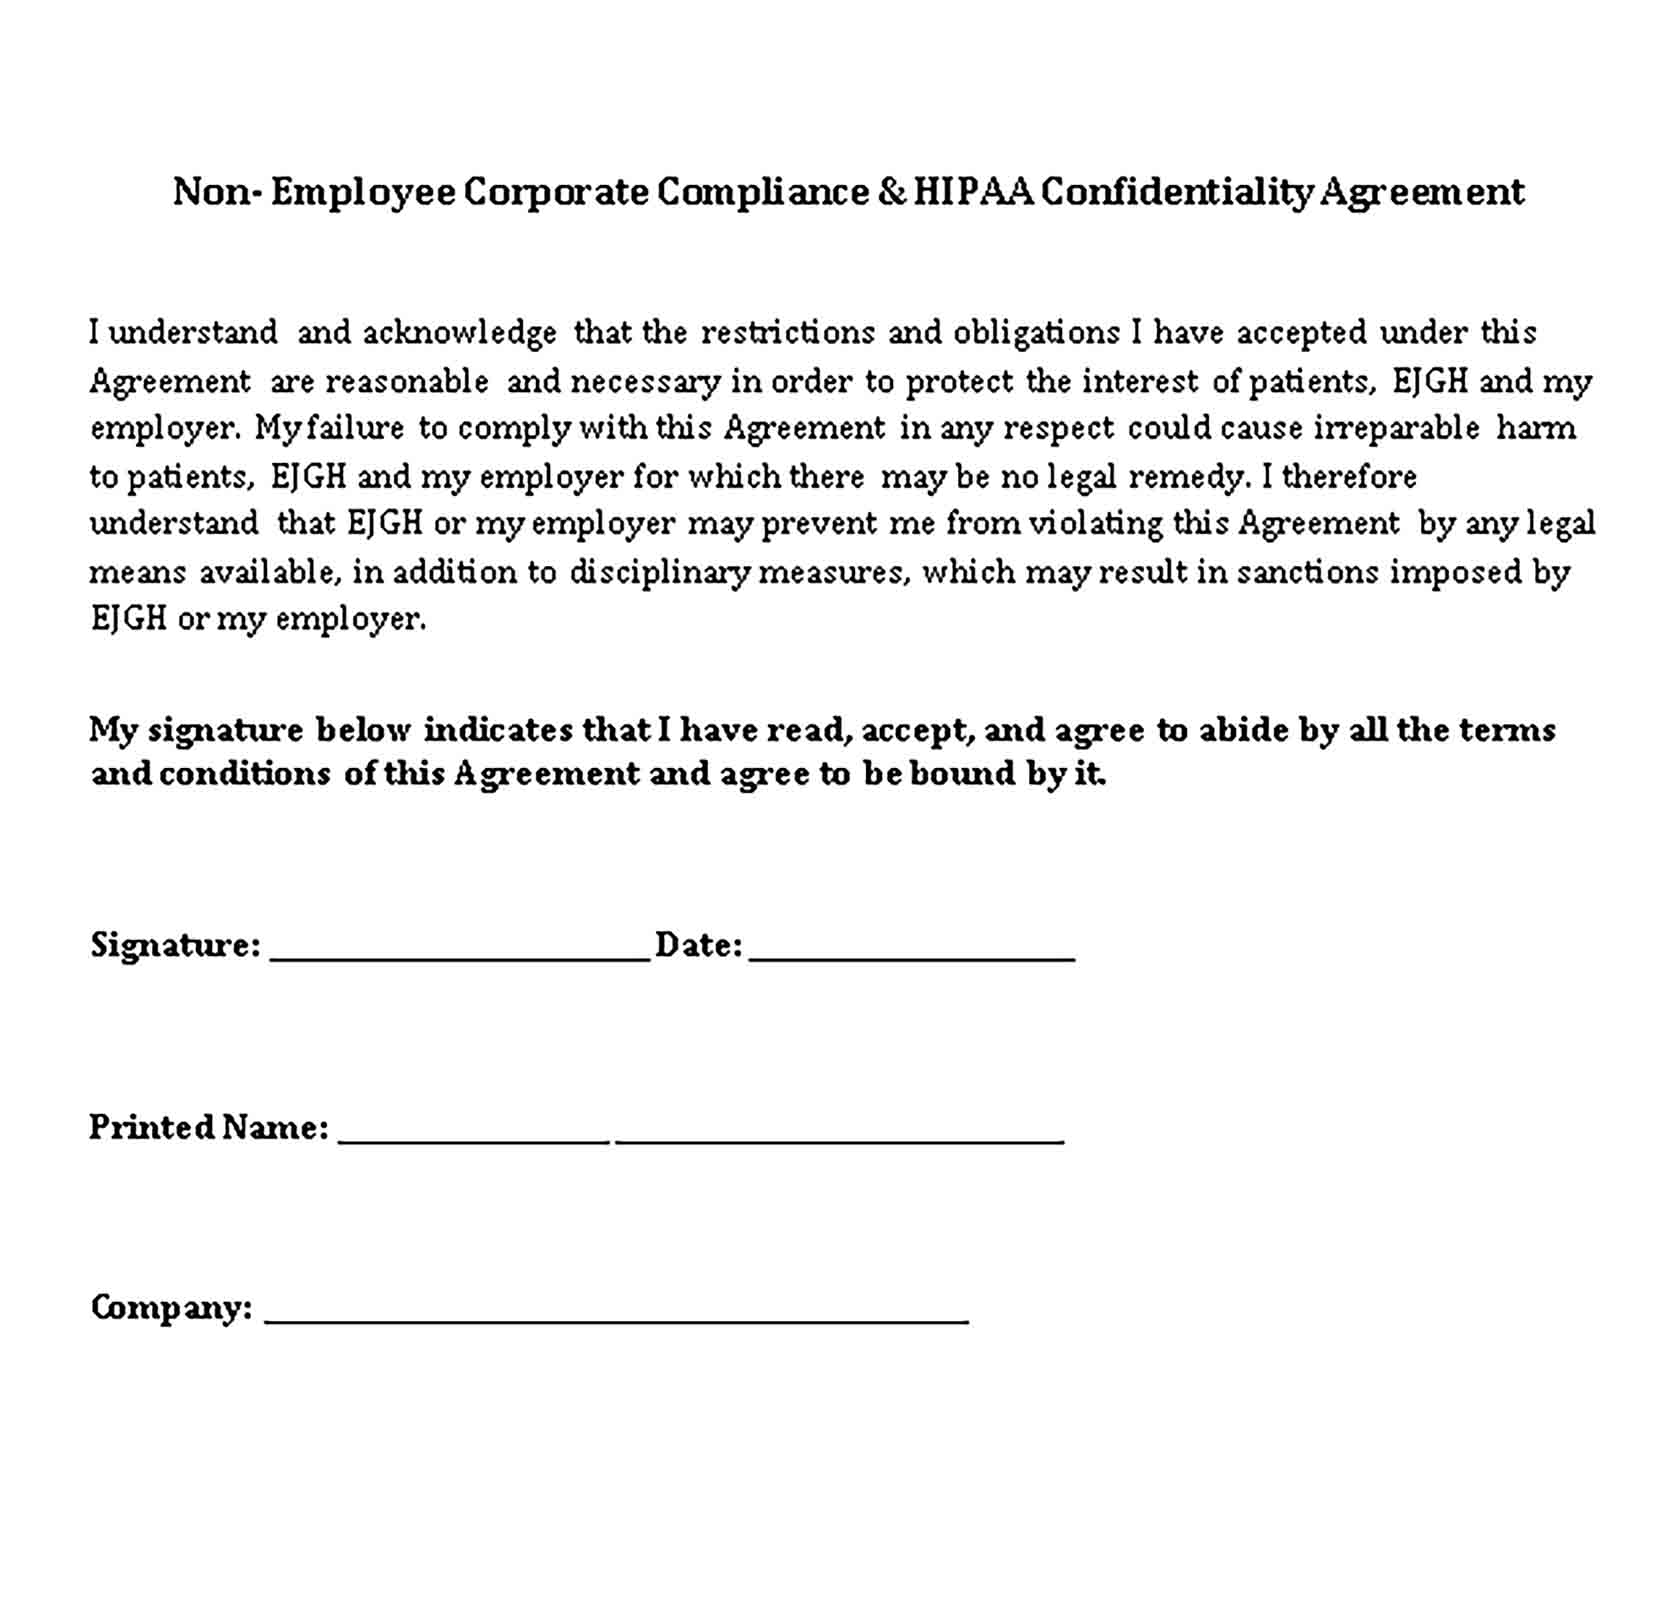 Templates non employee compliance and HIPAA Confidentiality Agreement Sample